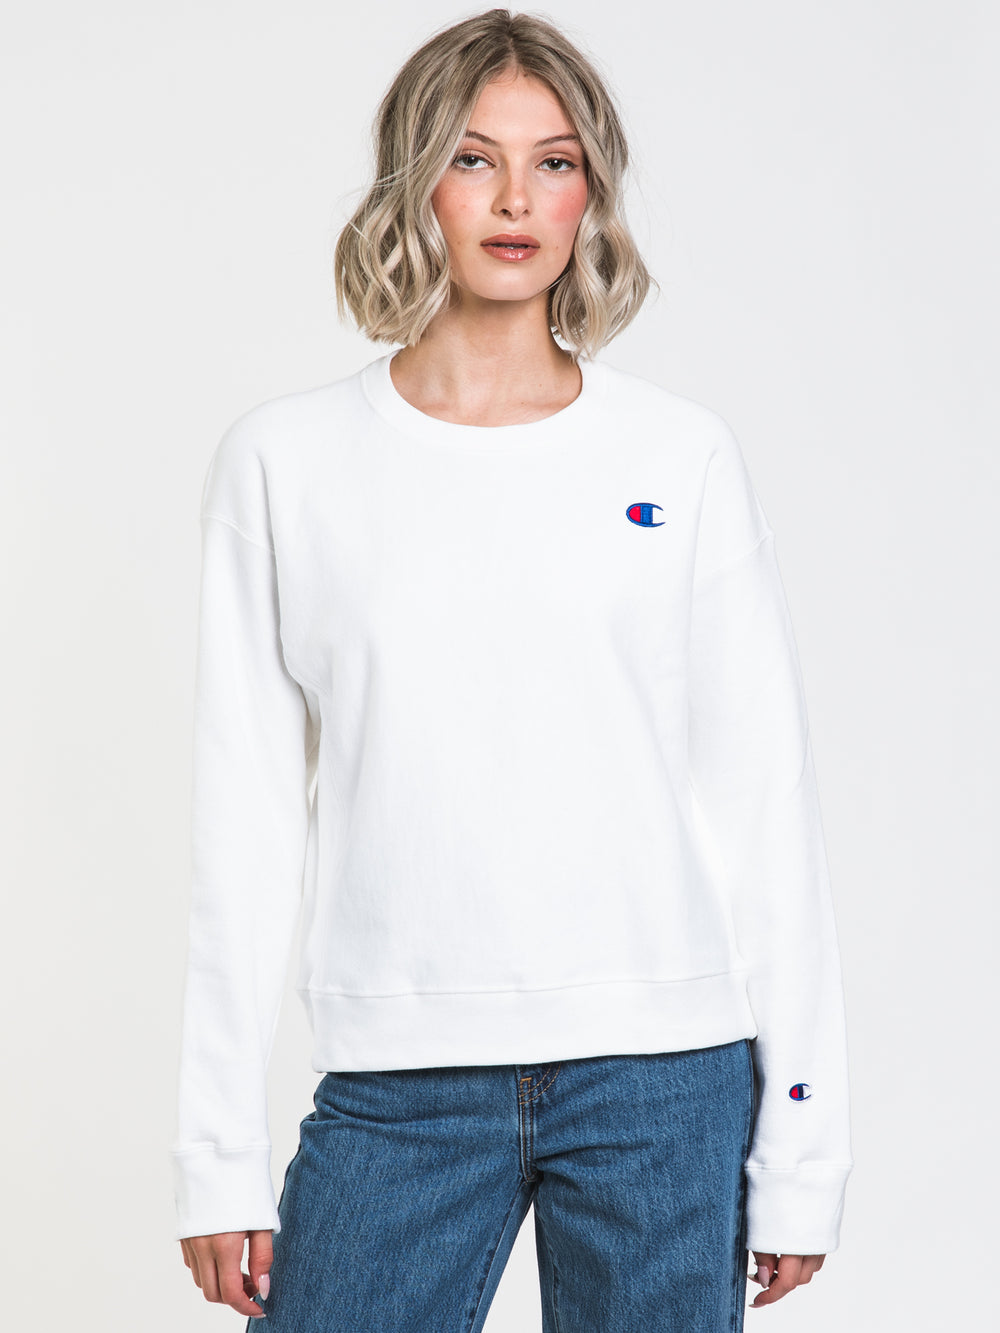 CHAMPION REVERSE WEAVE 'C' CREW - CLEARANCE